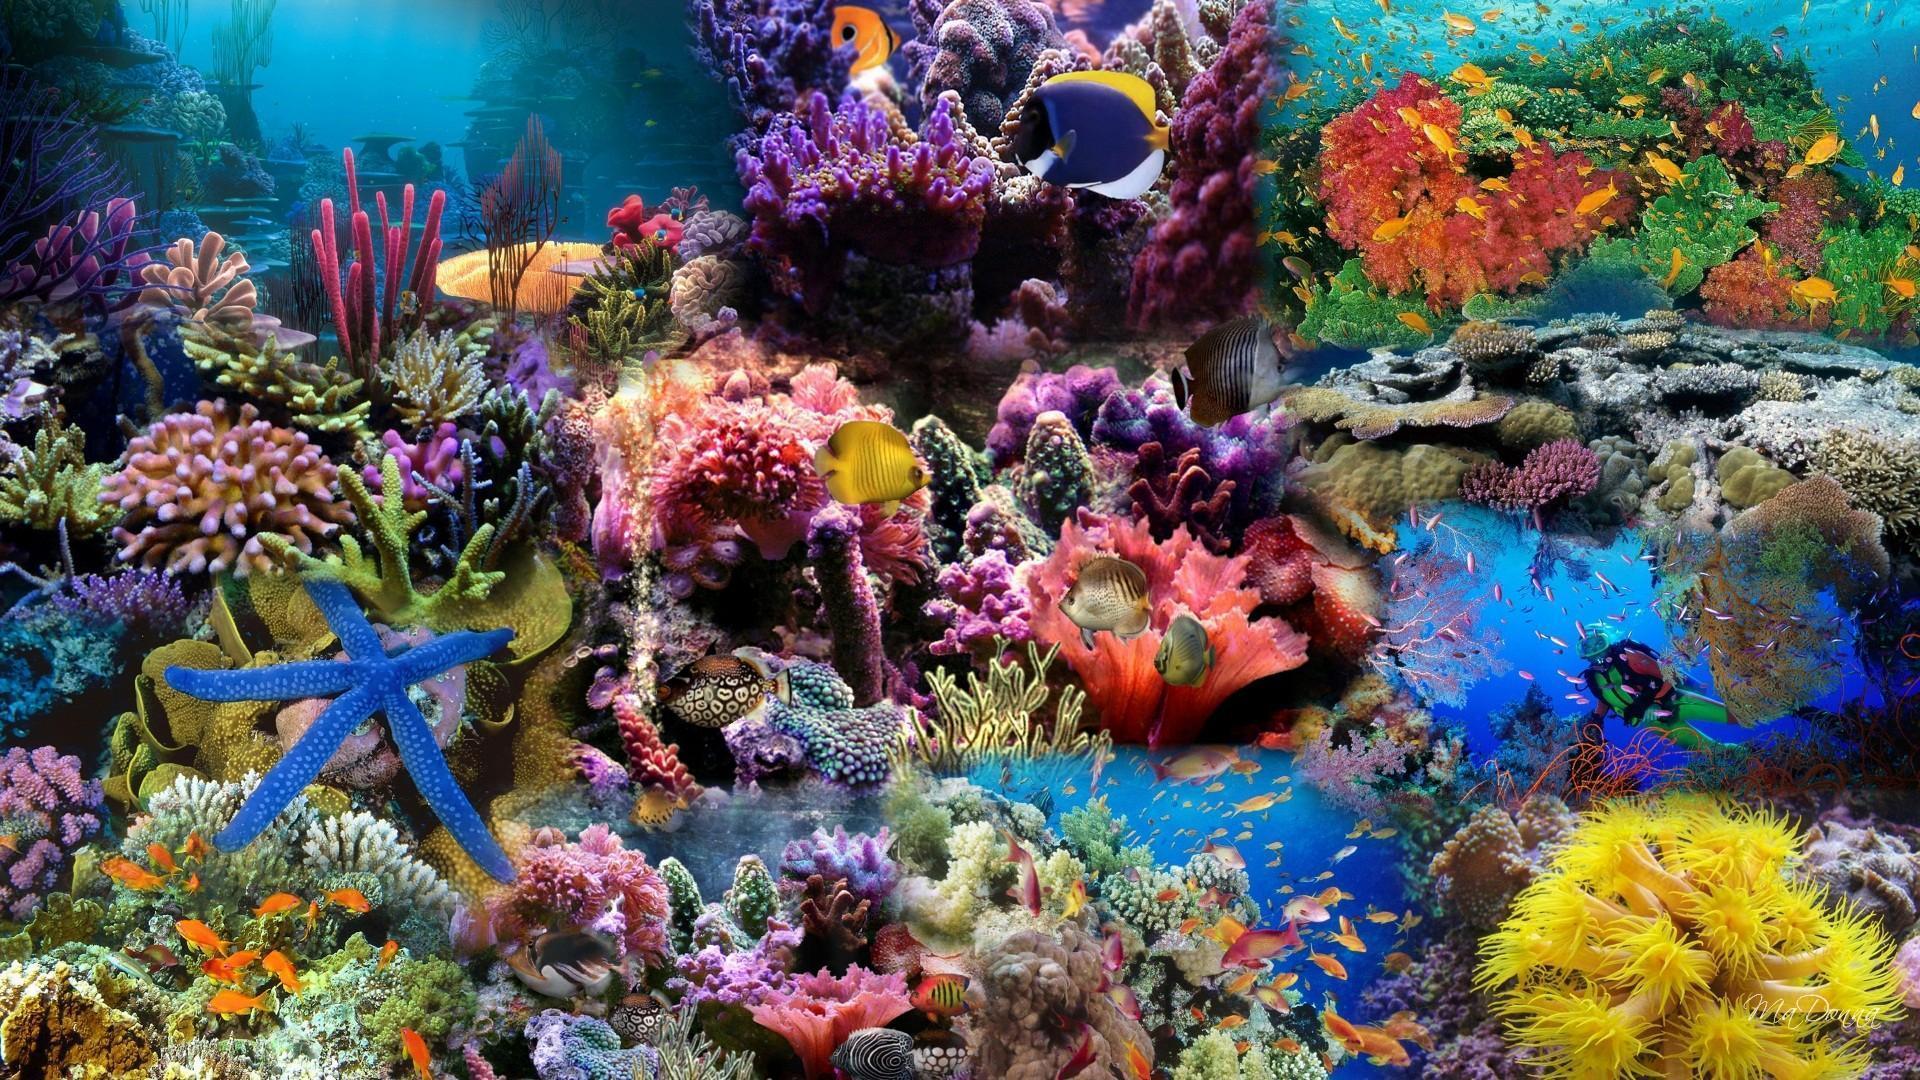 Hd Coral Reef Wallpaper Images amp Pictures   Becuo